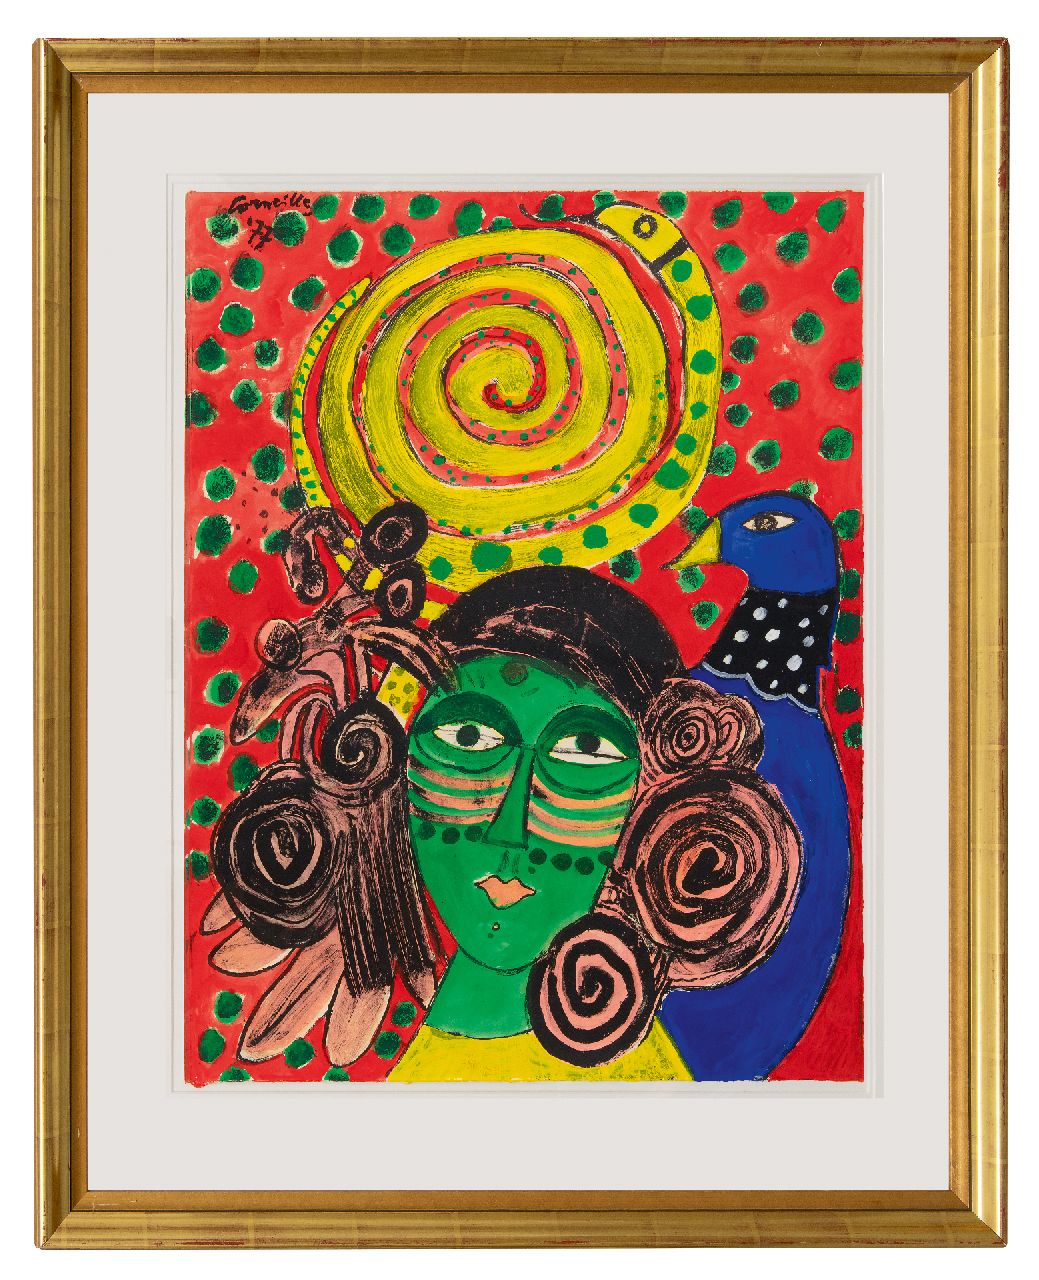 Corneille ('Corneille' Guillaume Beverloo)   | Corneille ('Corneille' Guillaume Beverloo) | Watercolours and drawings offered for sale | Woman with bird and snake, gouache on paper 66.1 x 51.8 cm, signed u.l. and dated '77